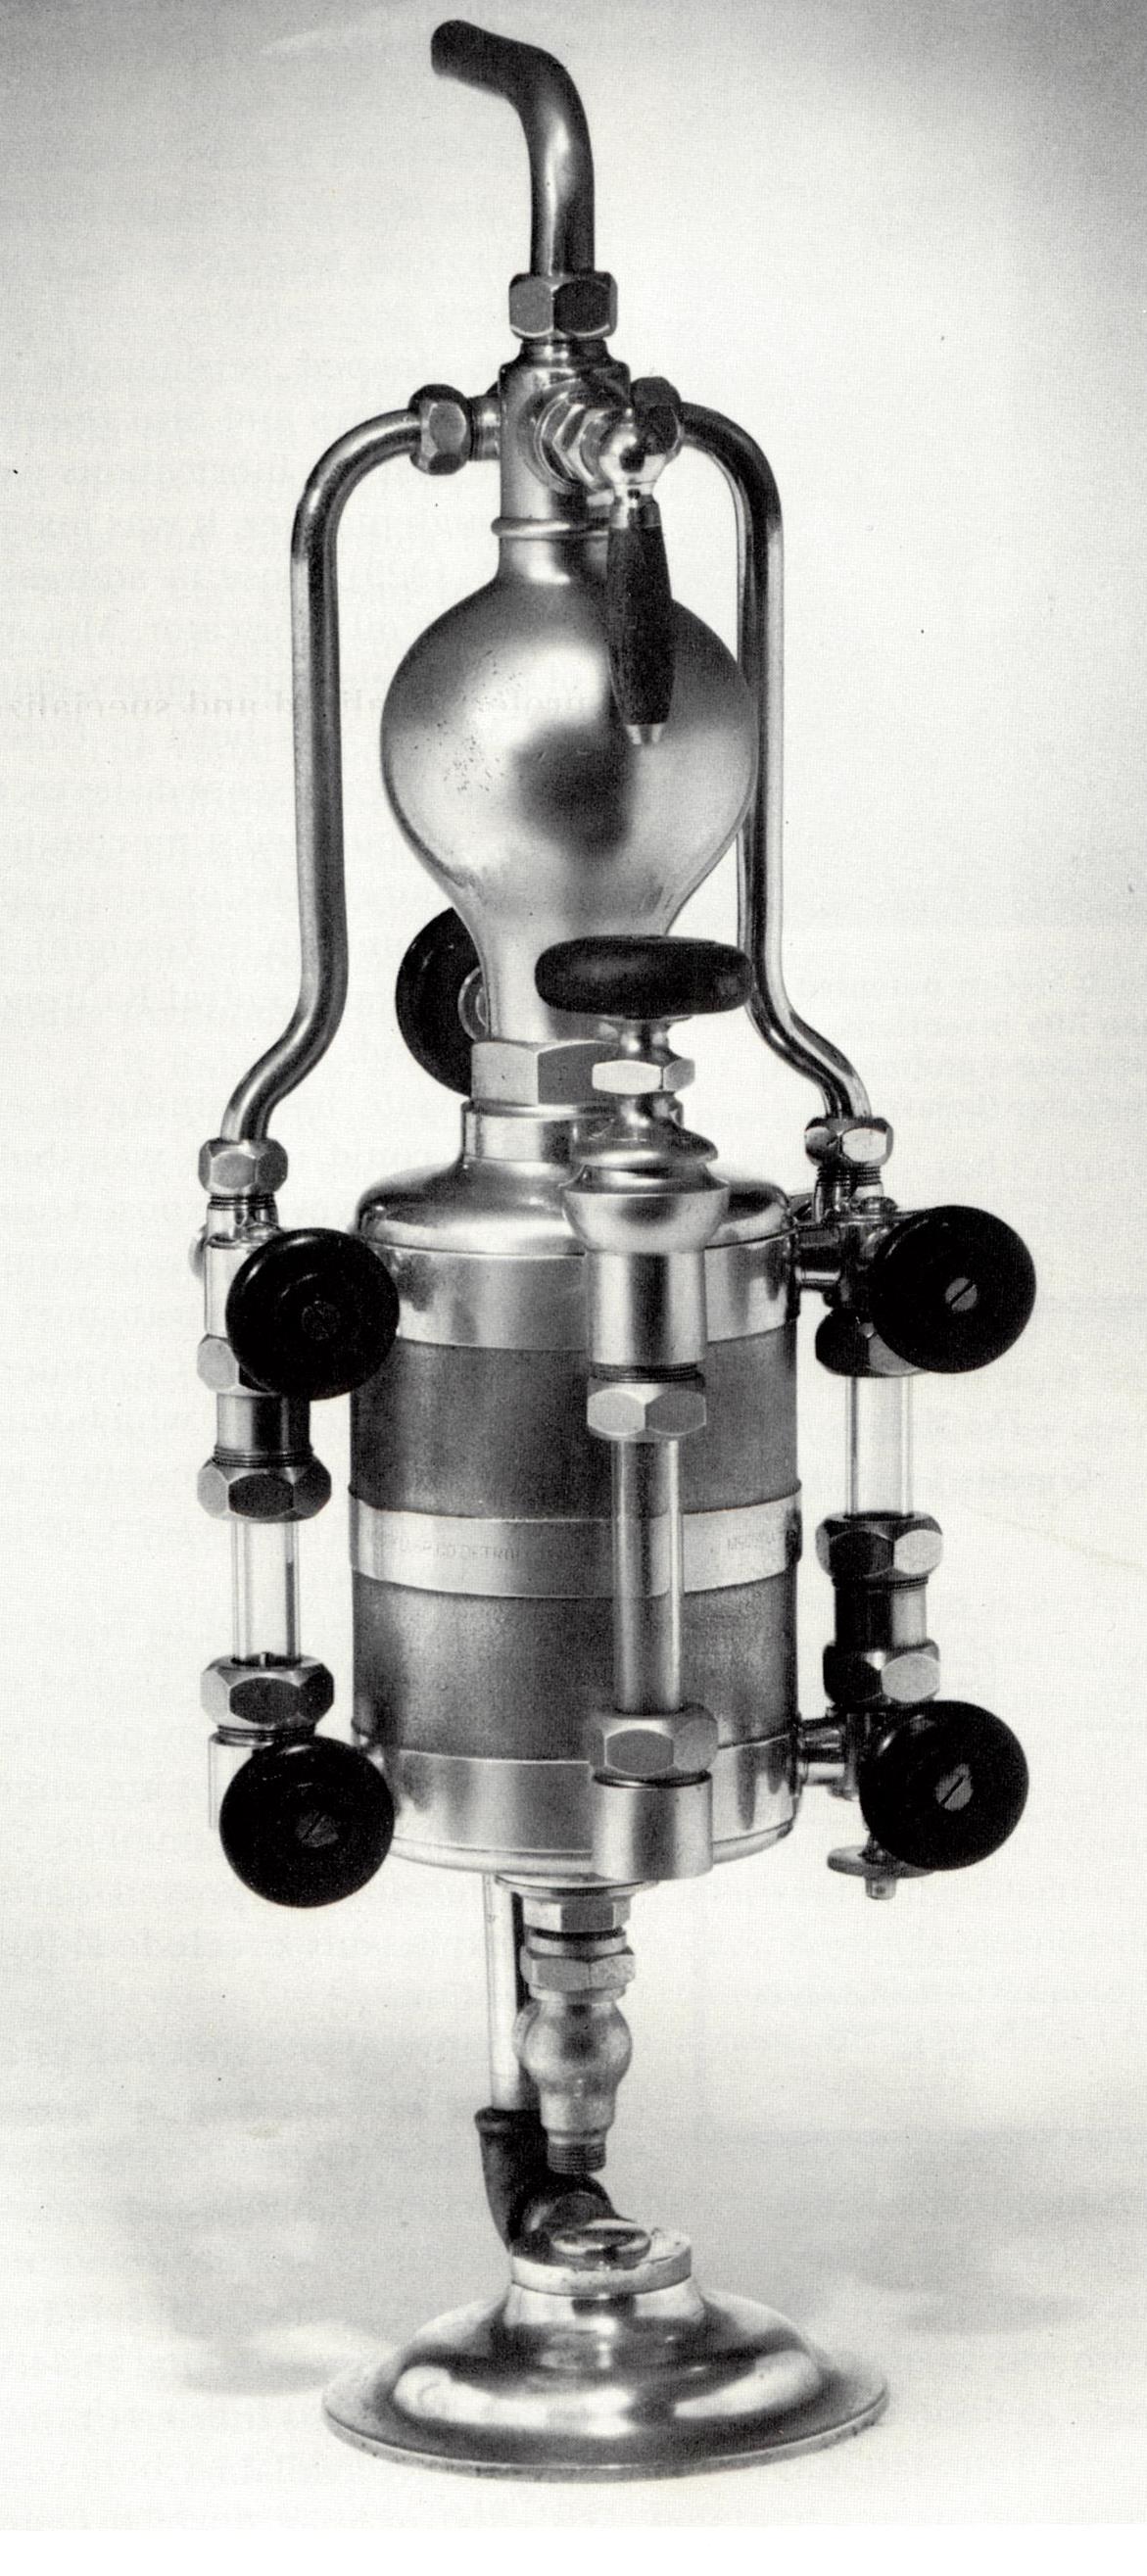 A model of McCoy’s hydrostatic lubricating system for steam engines, photo courtesy of The Henry Ford Museum.